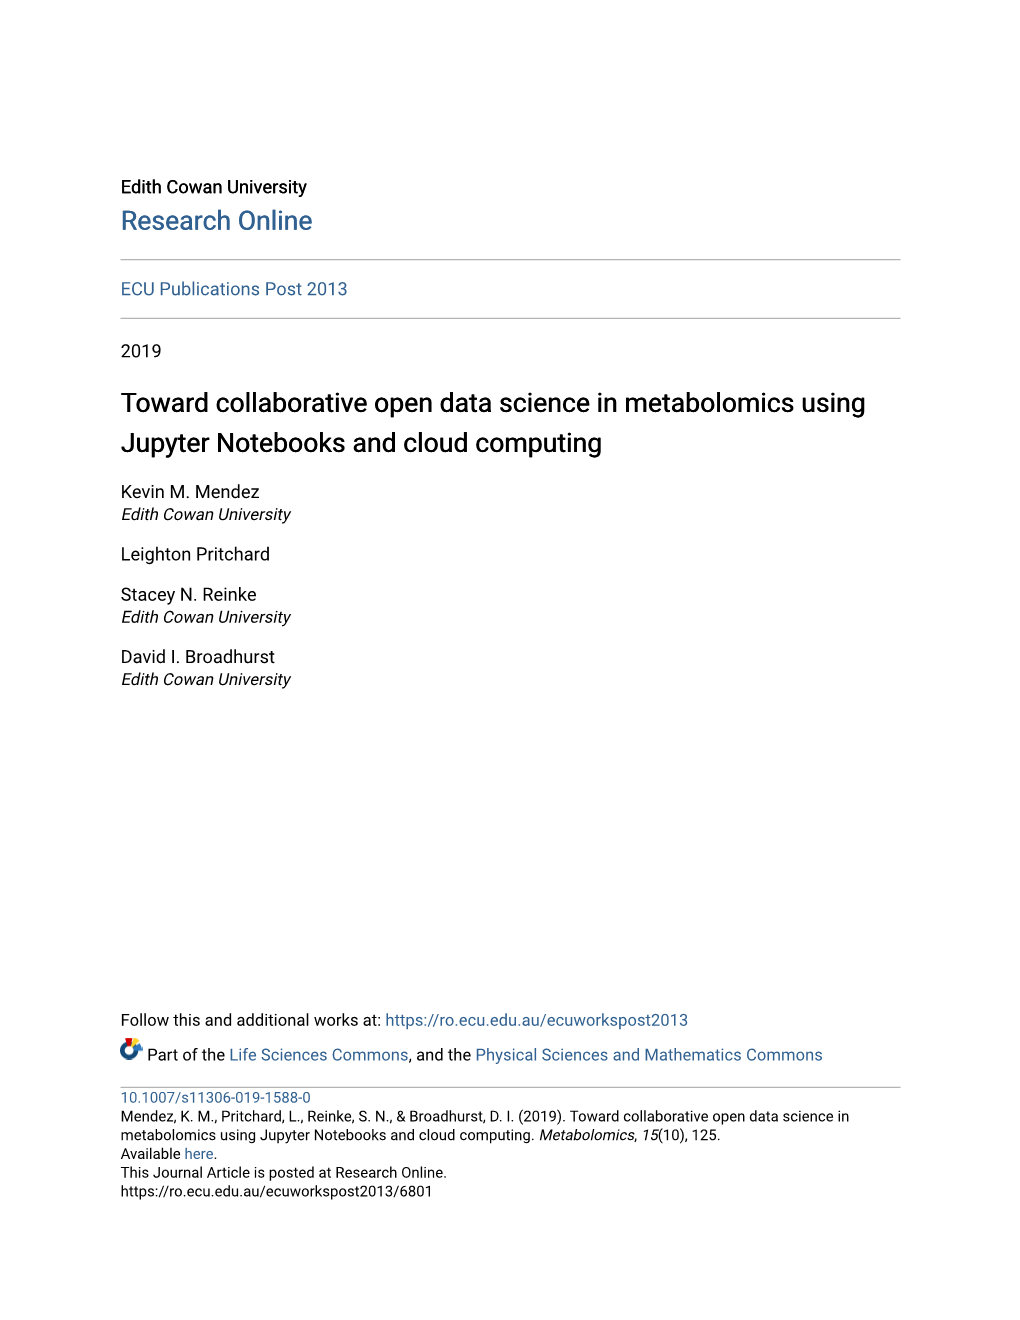 Toward Collaborative Open Data Science in Metabolomics Using Jupyter Notebooks and Cloud Computing